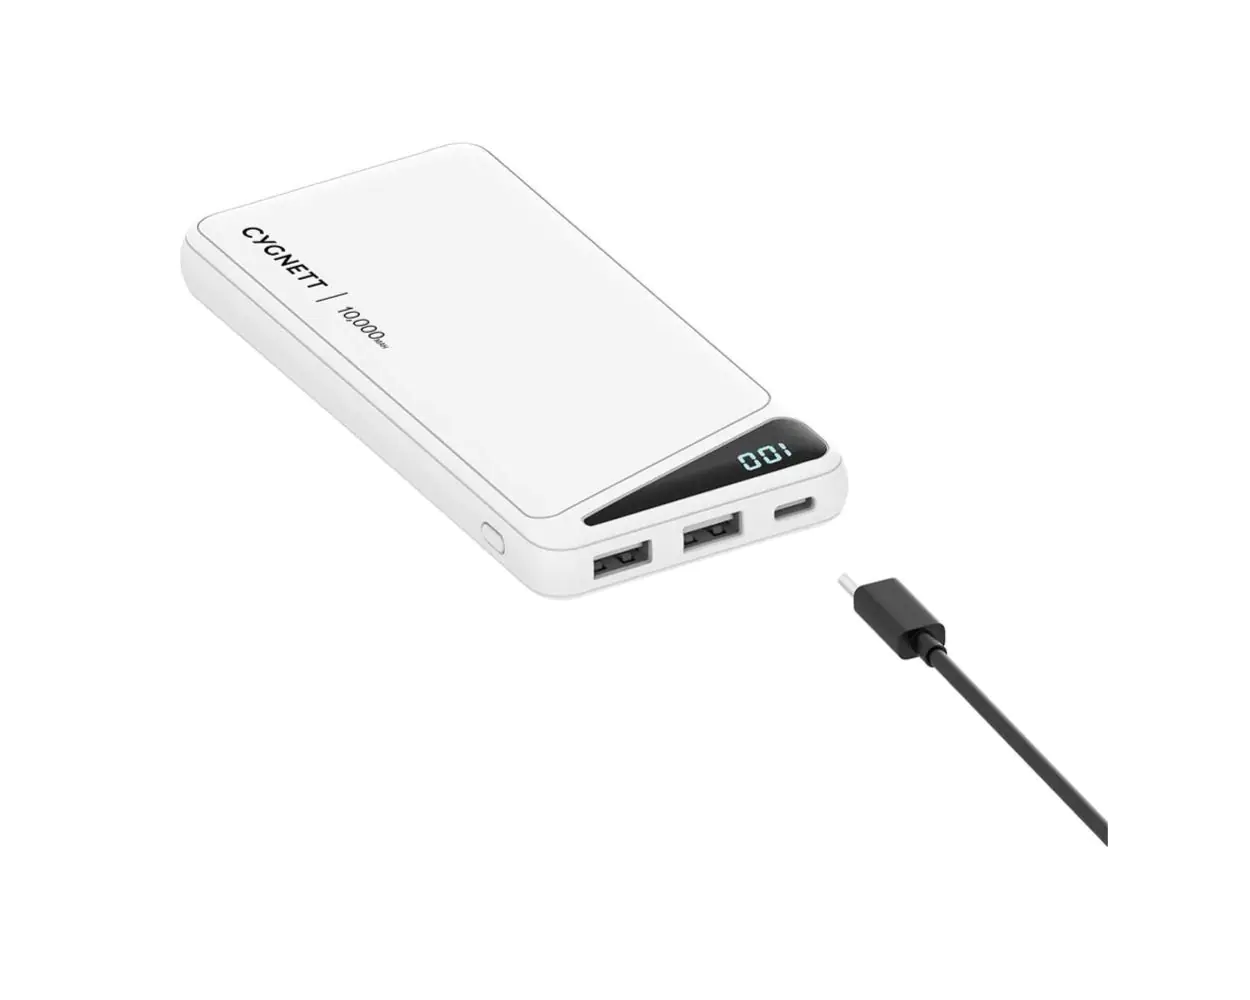 Cygnett Power Bank: Your Essential Portable Charging Solution